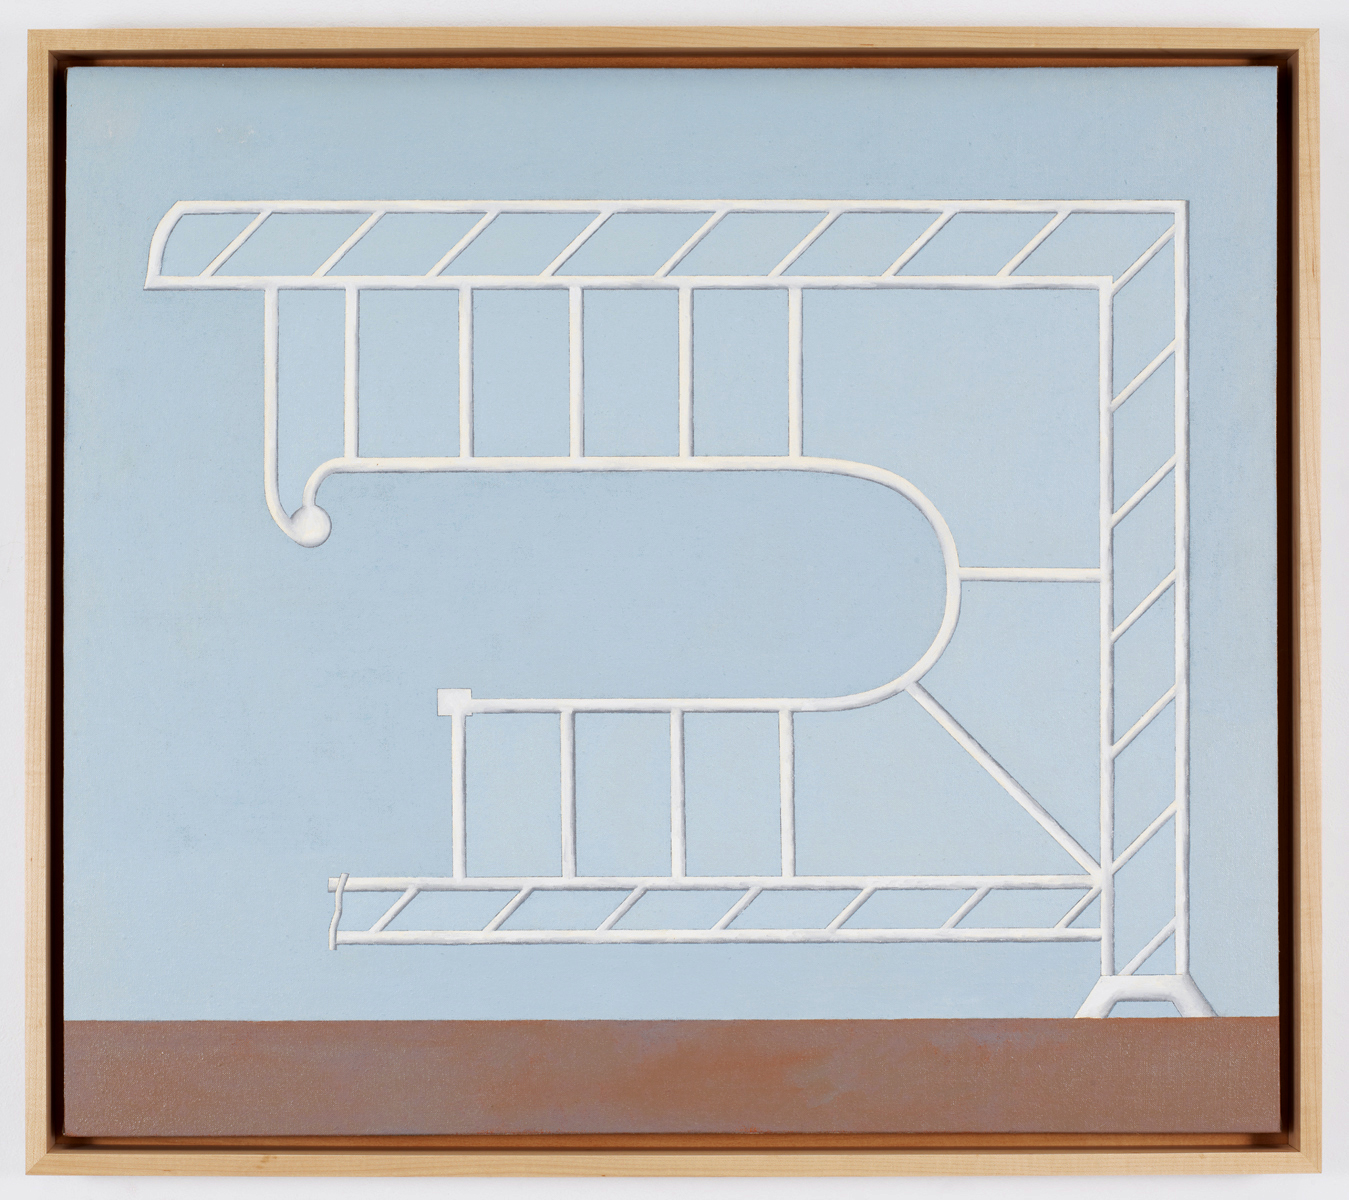 Post/Beam N2, 2011, Oil on linen, 28 x 32 inches